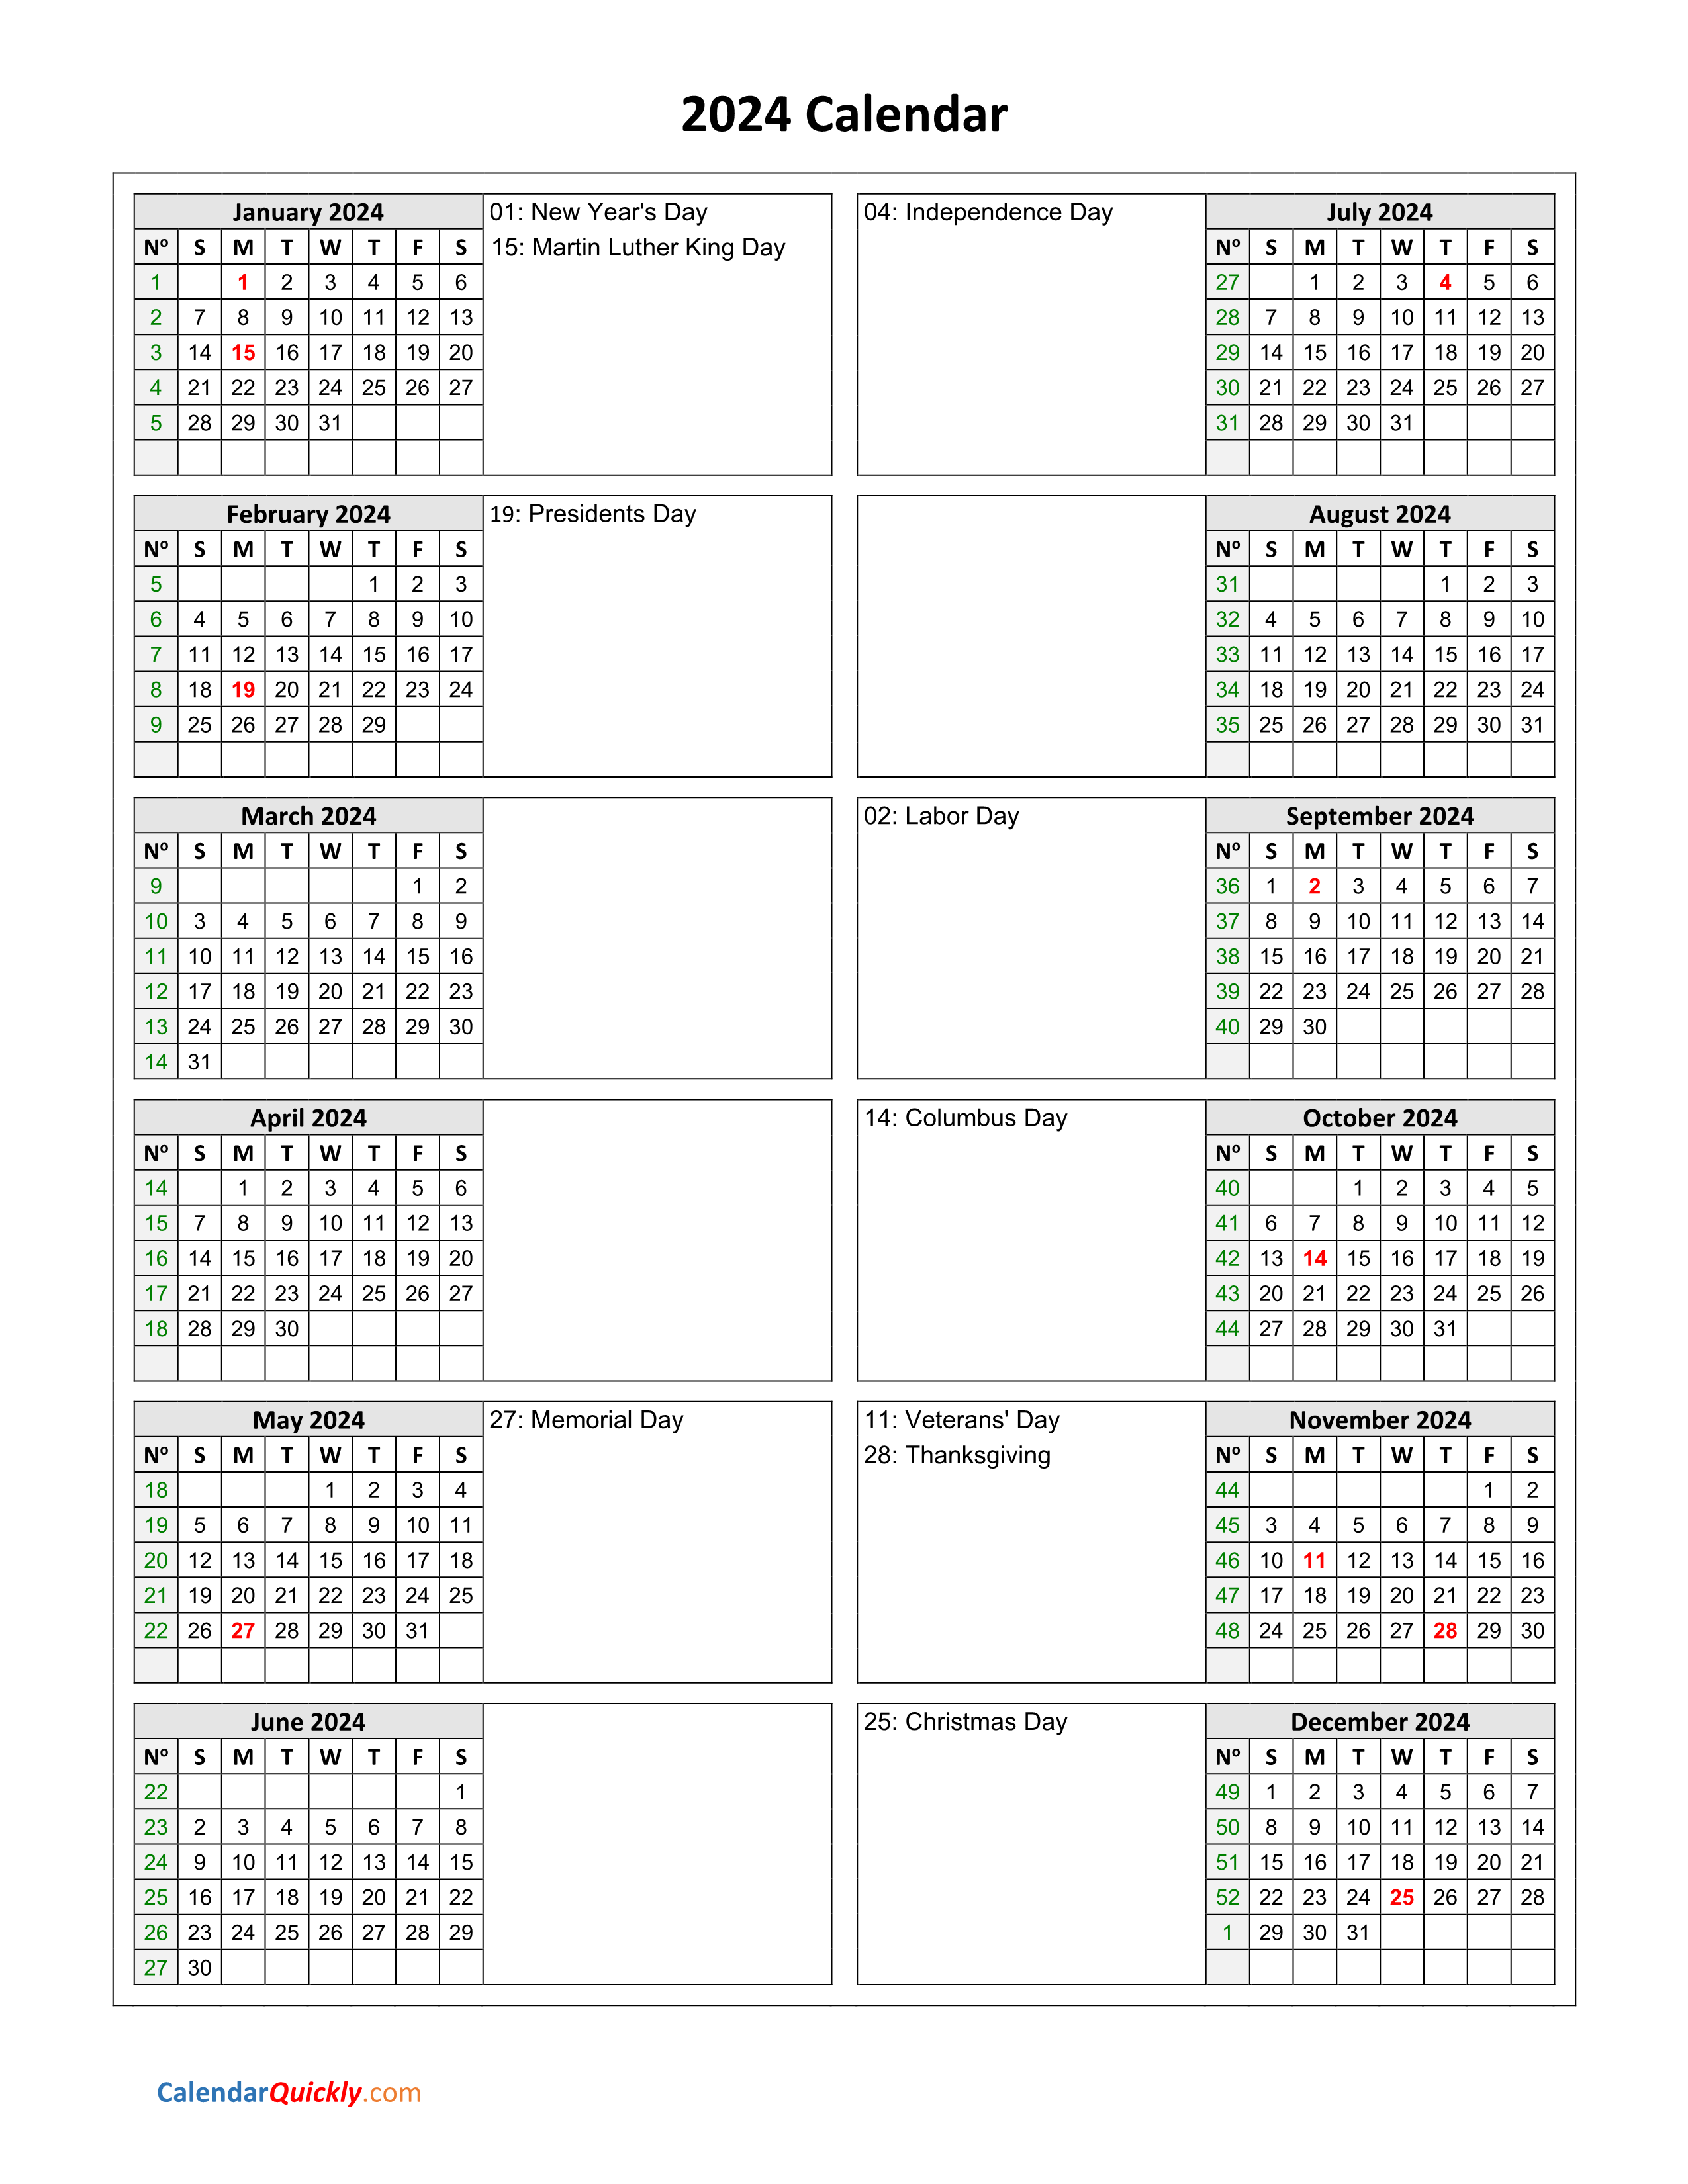 Printable Calendars 2024 Pdf Calendar 2024 With Federal Holidays - Free Printable 2024 Monthly Calendar With Holidays One Page